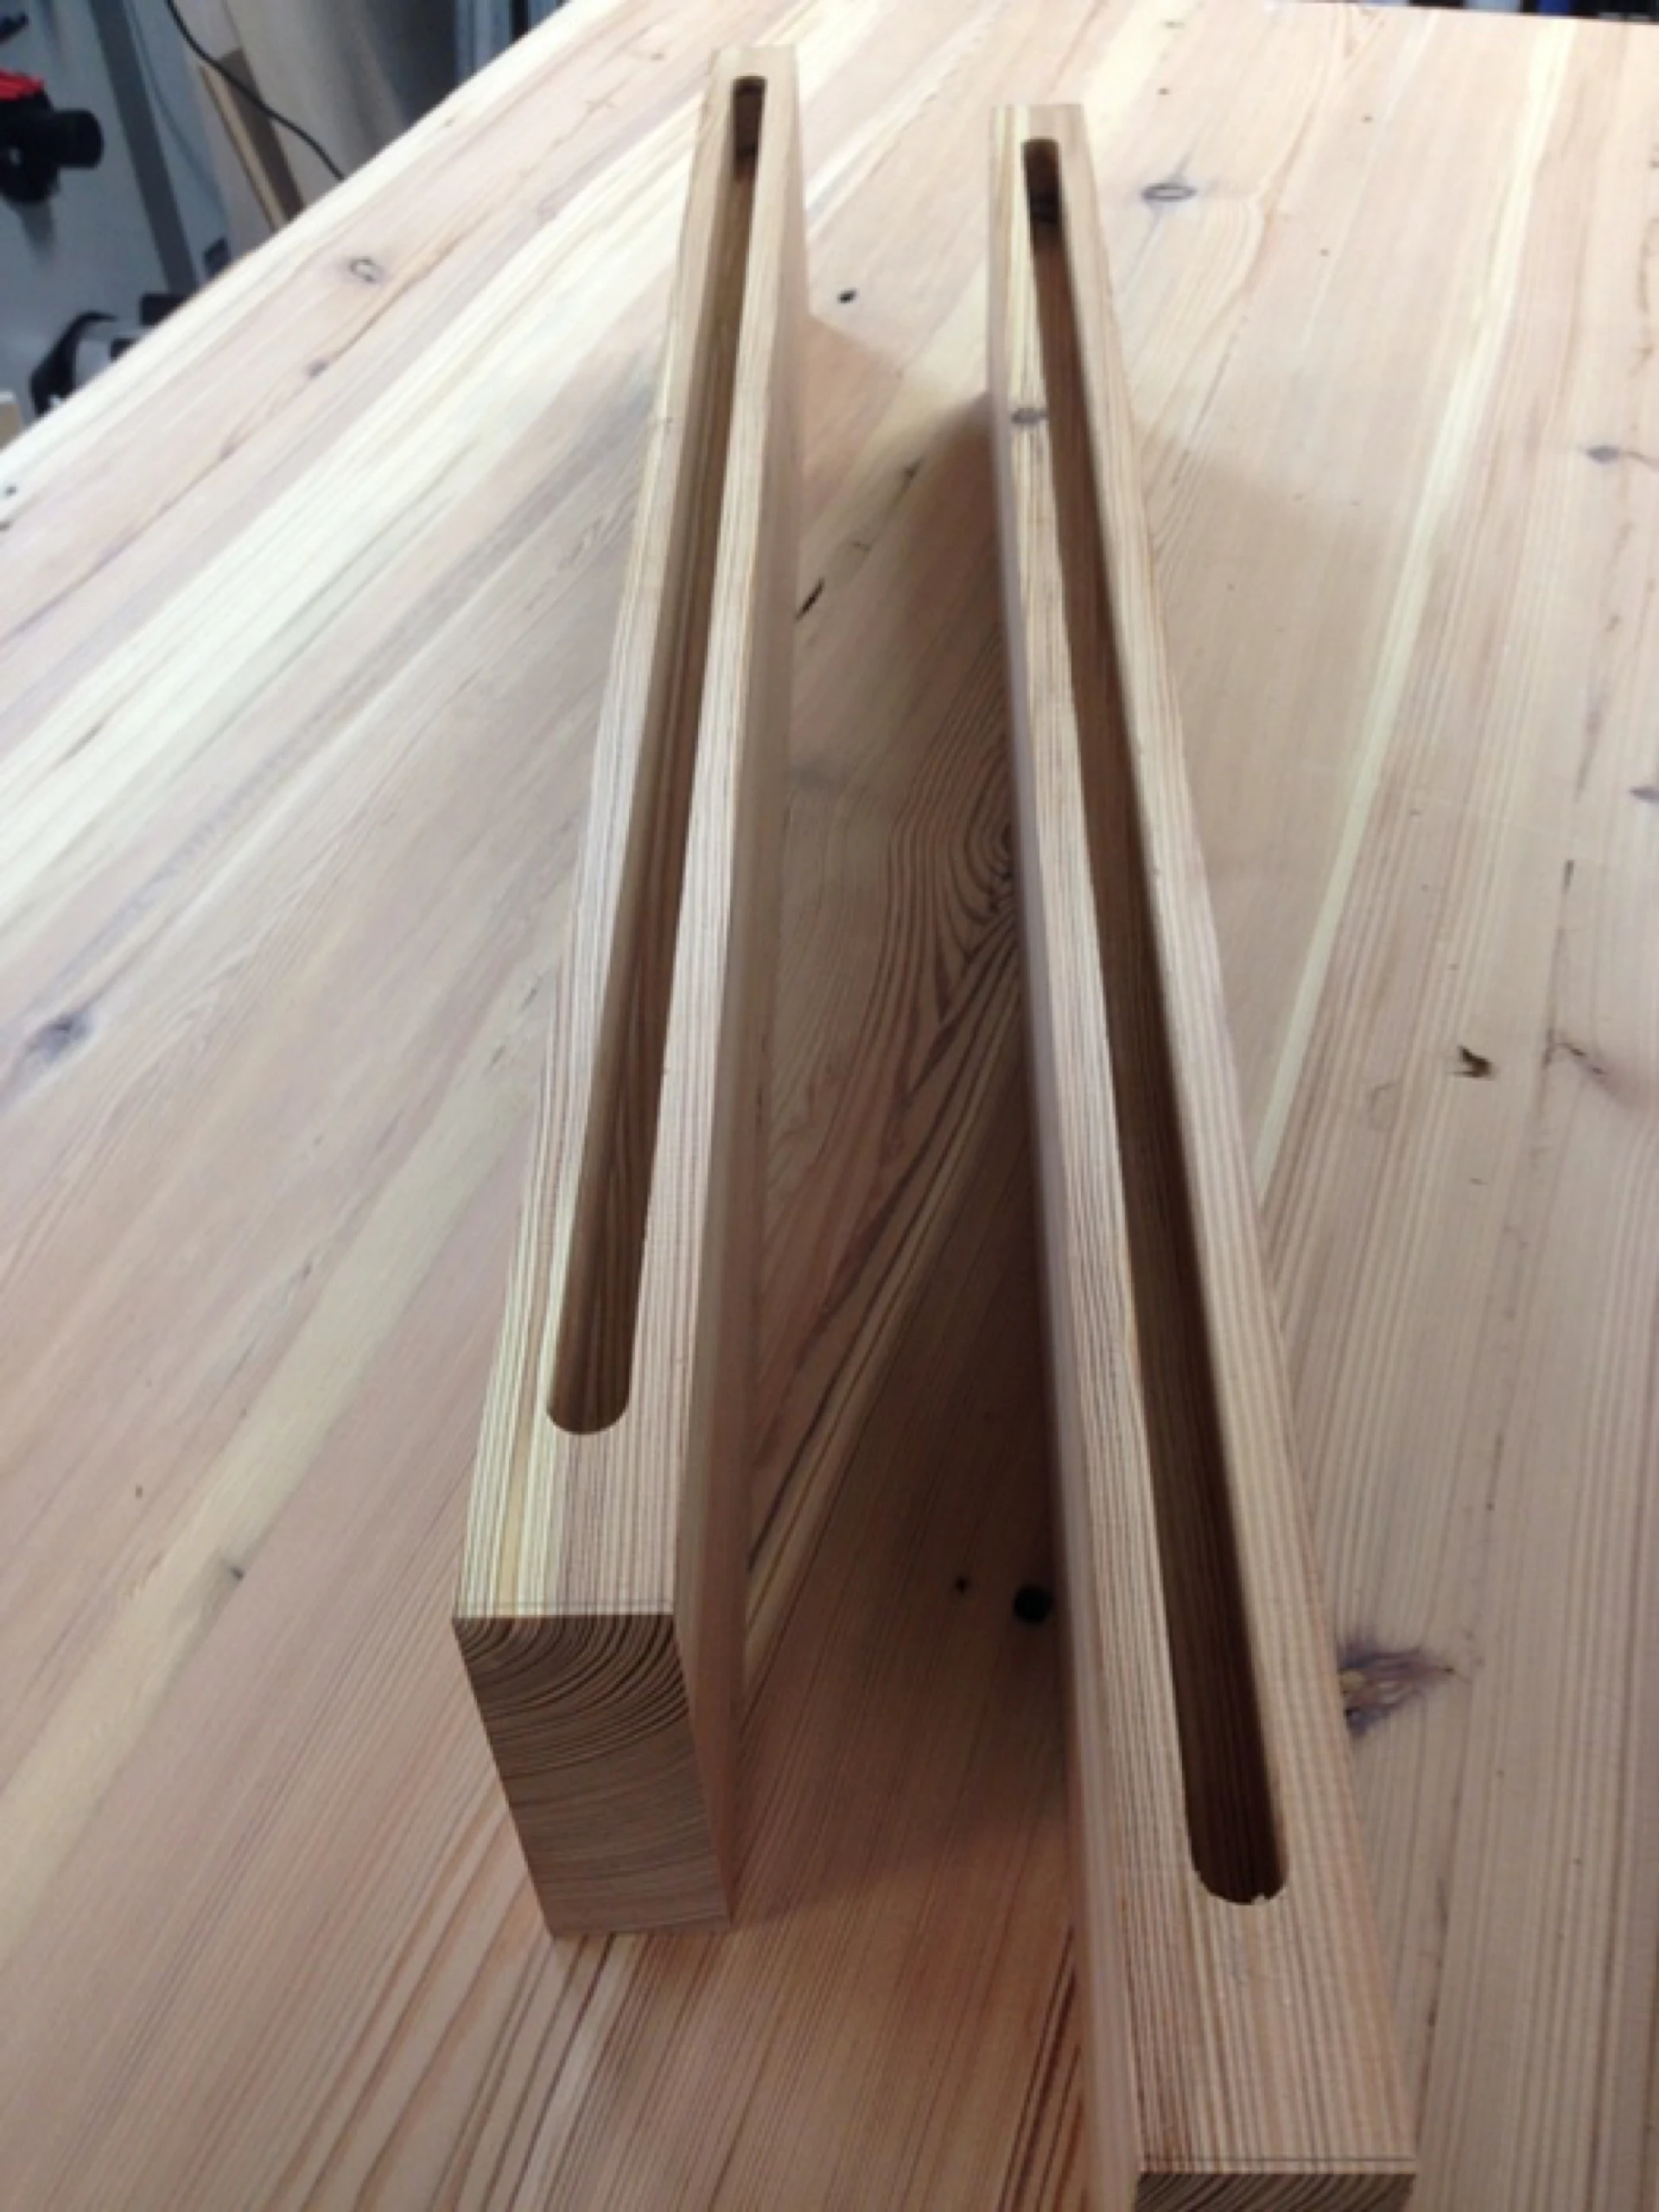 Breadboard ends - Mortise and Tenon